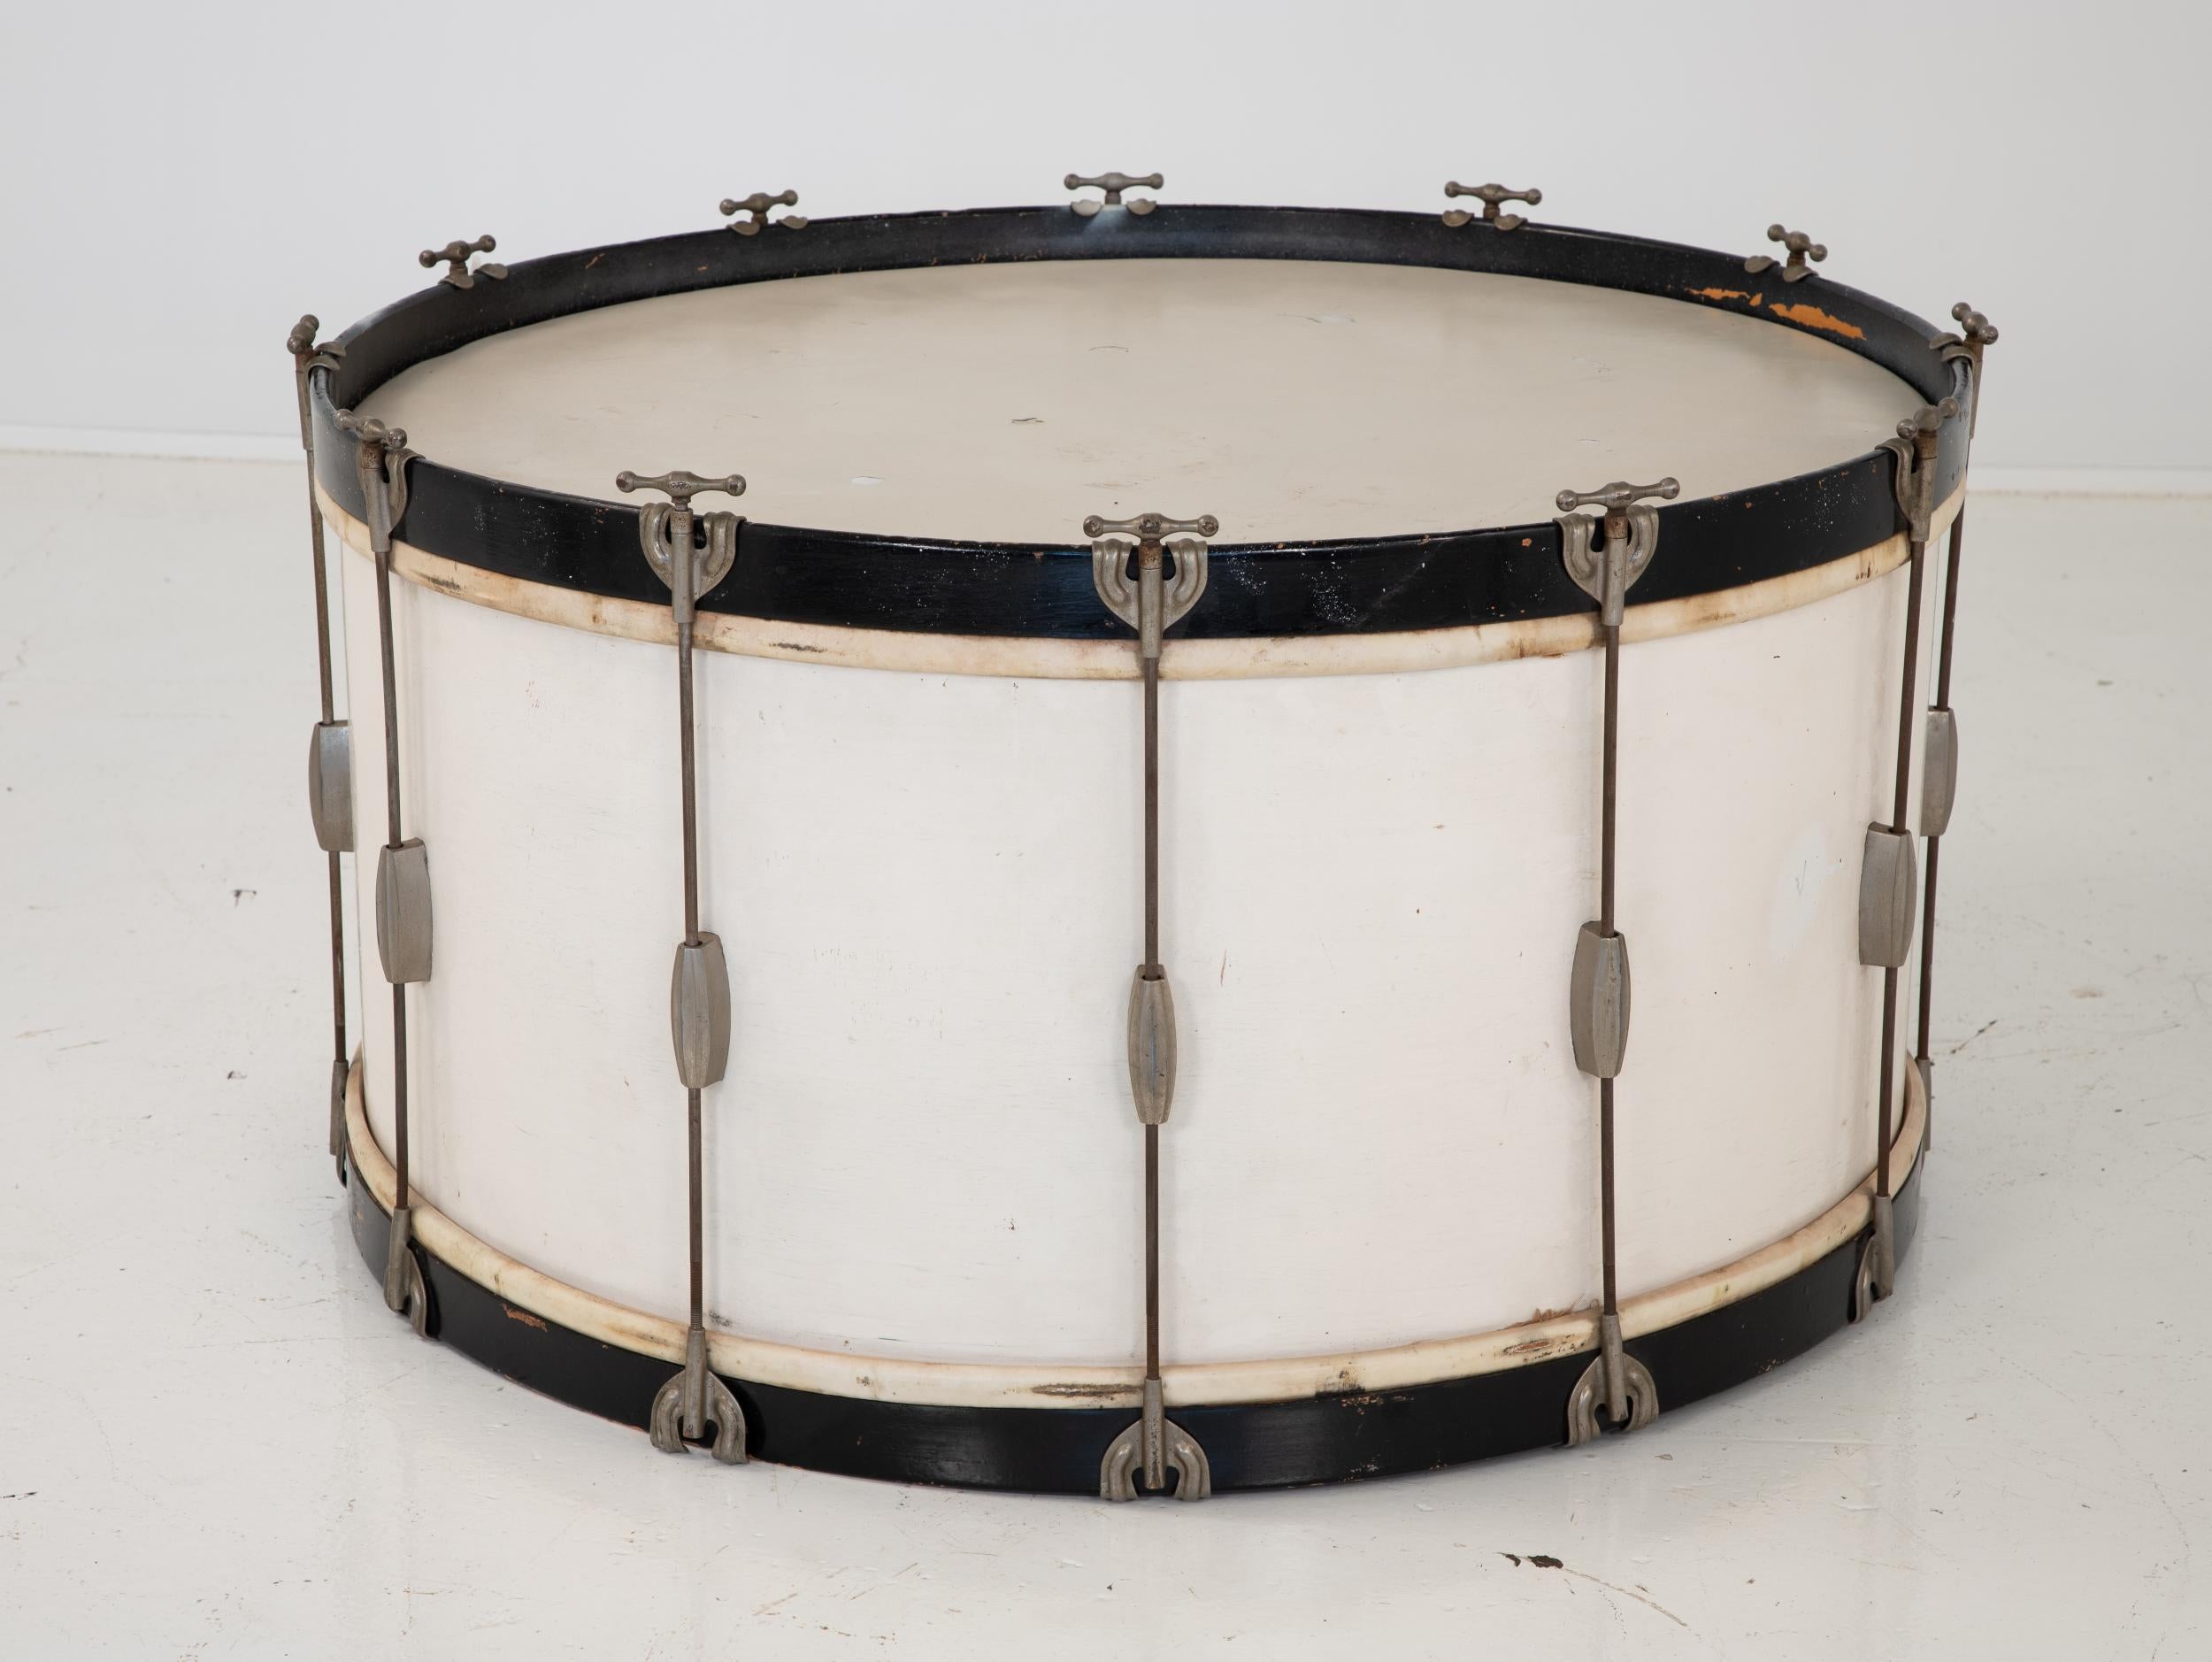 A mid 20th-century large drum to be used as a cocktail table. Wear consistent with age and use.